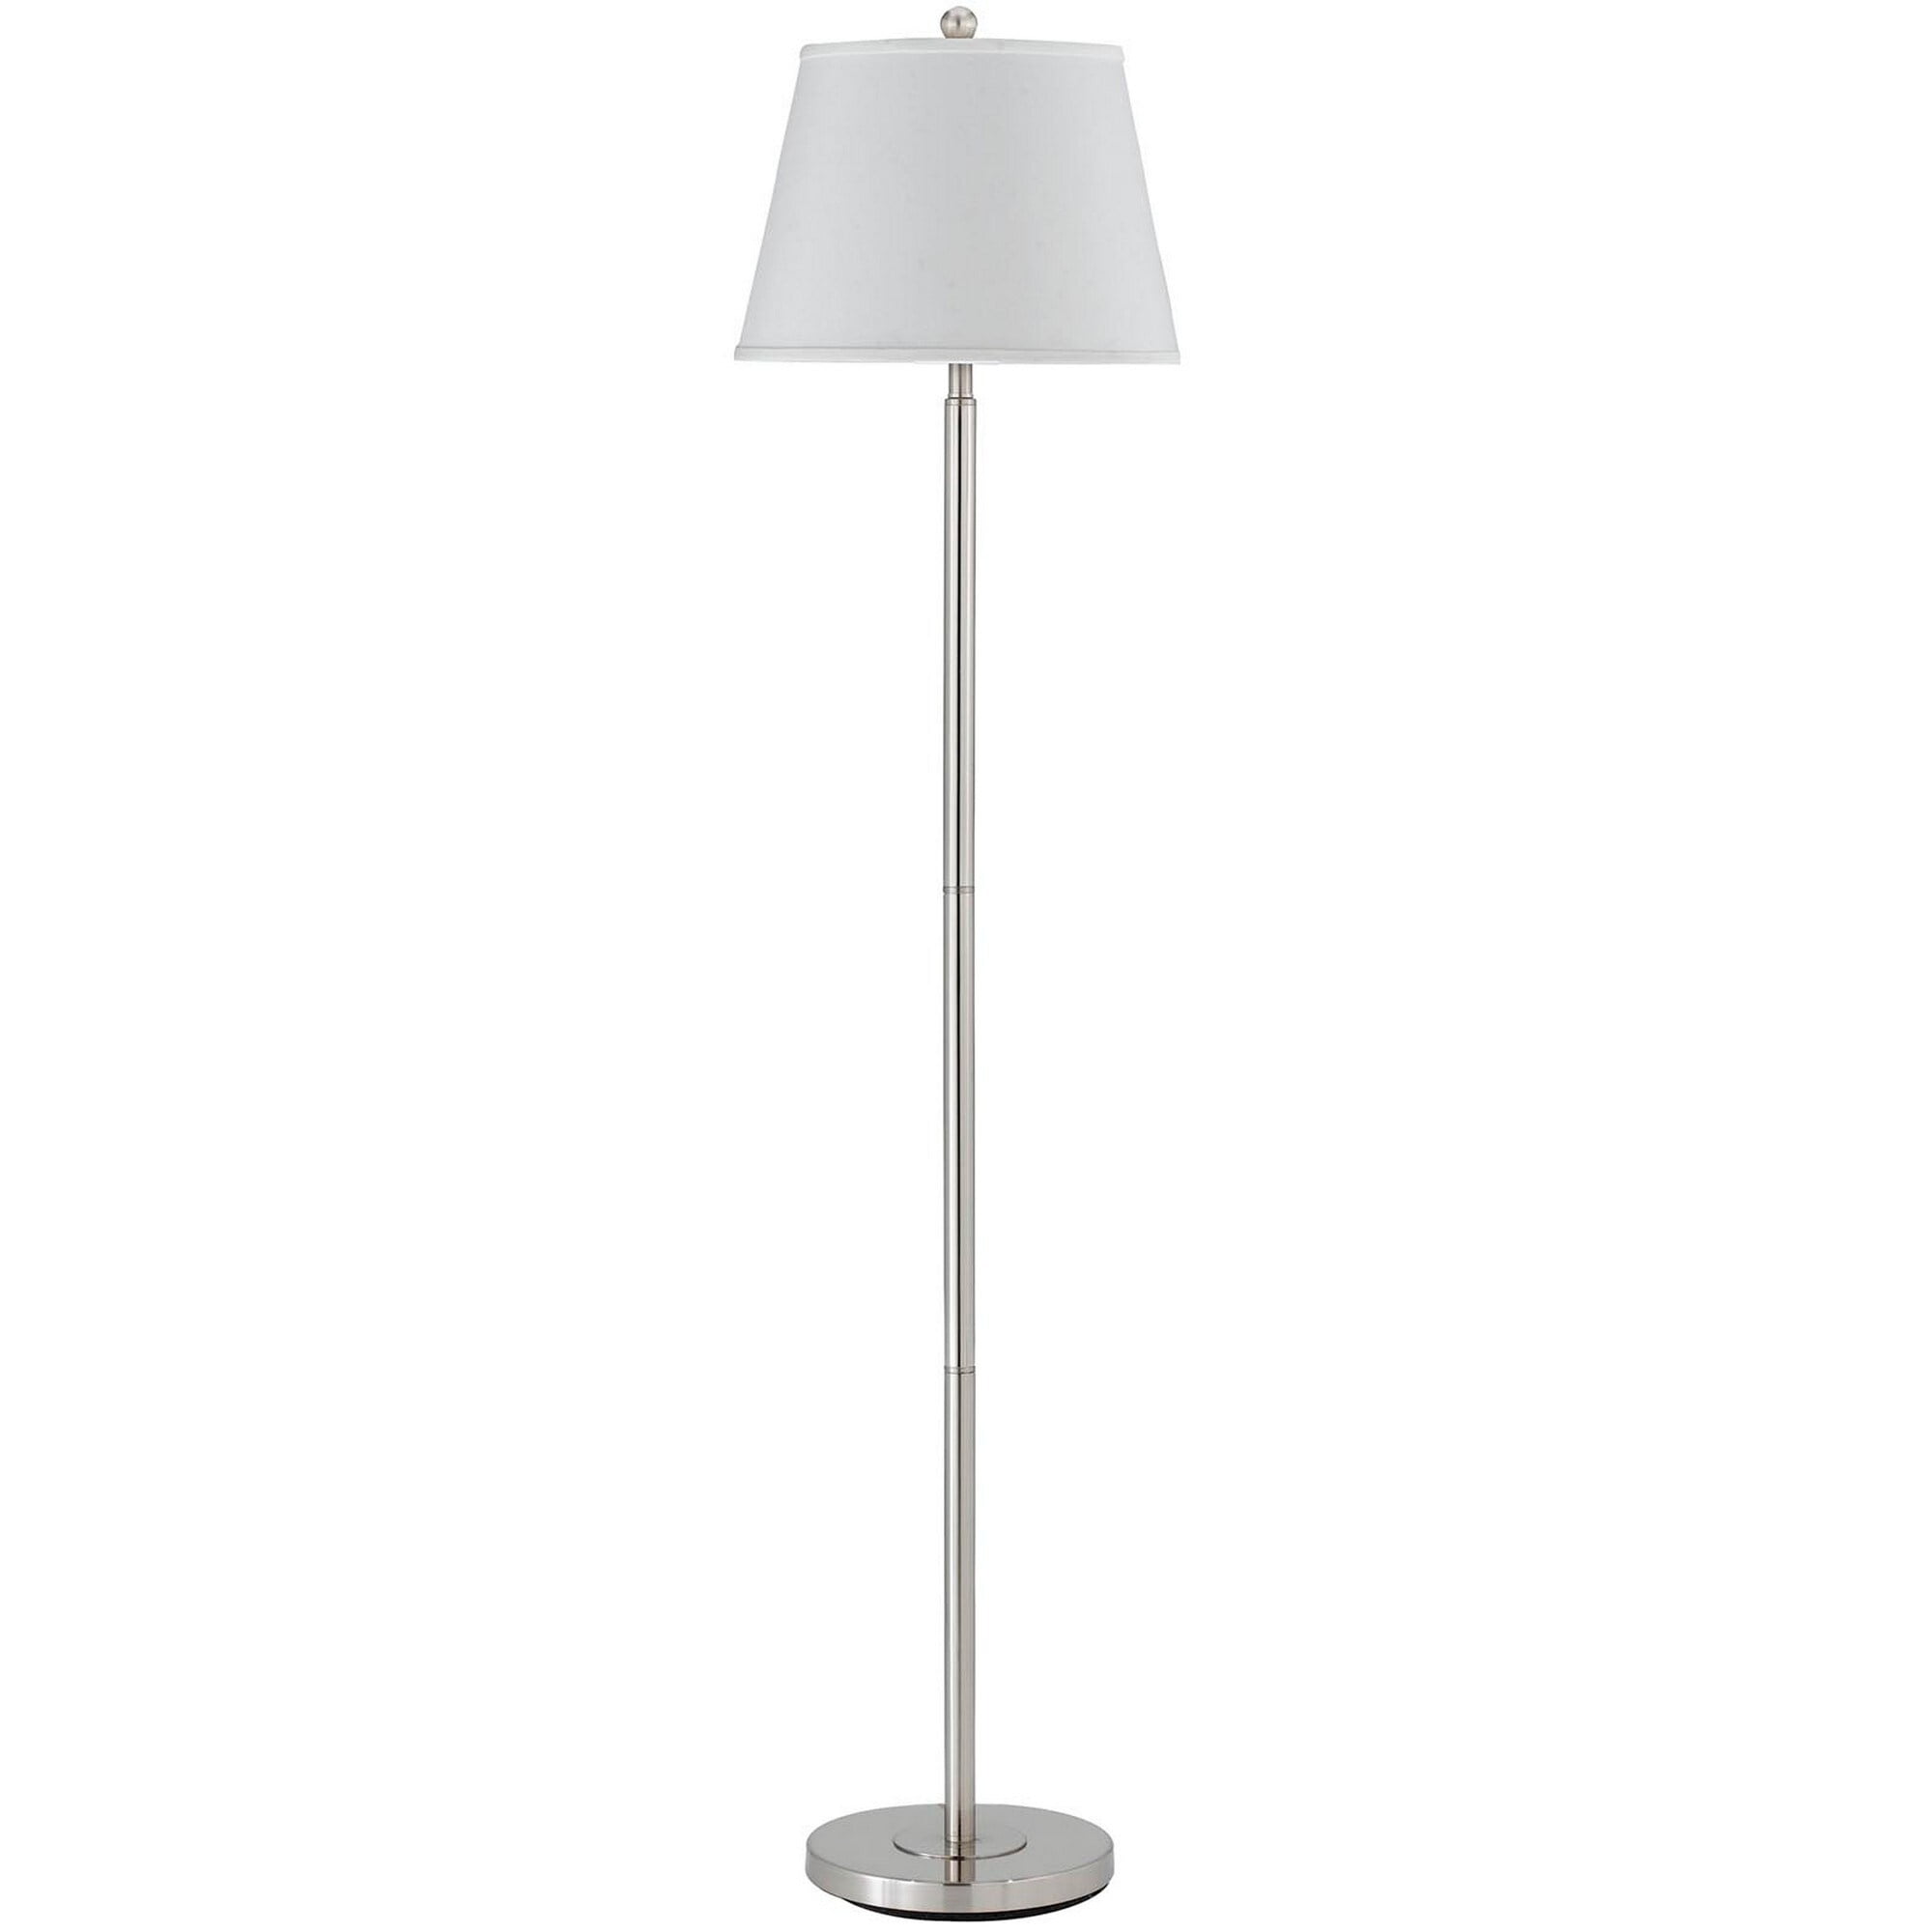 Picture of Benjara BM225108 Metal Round 3 Way Floor Lamp with Spider Type Shade, Silver